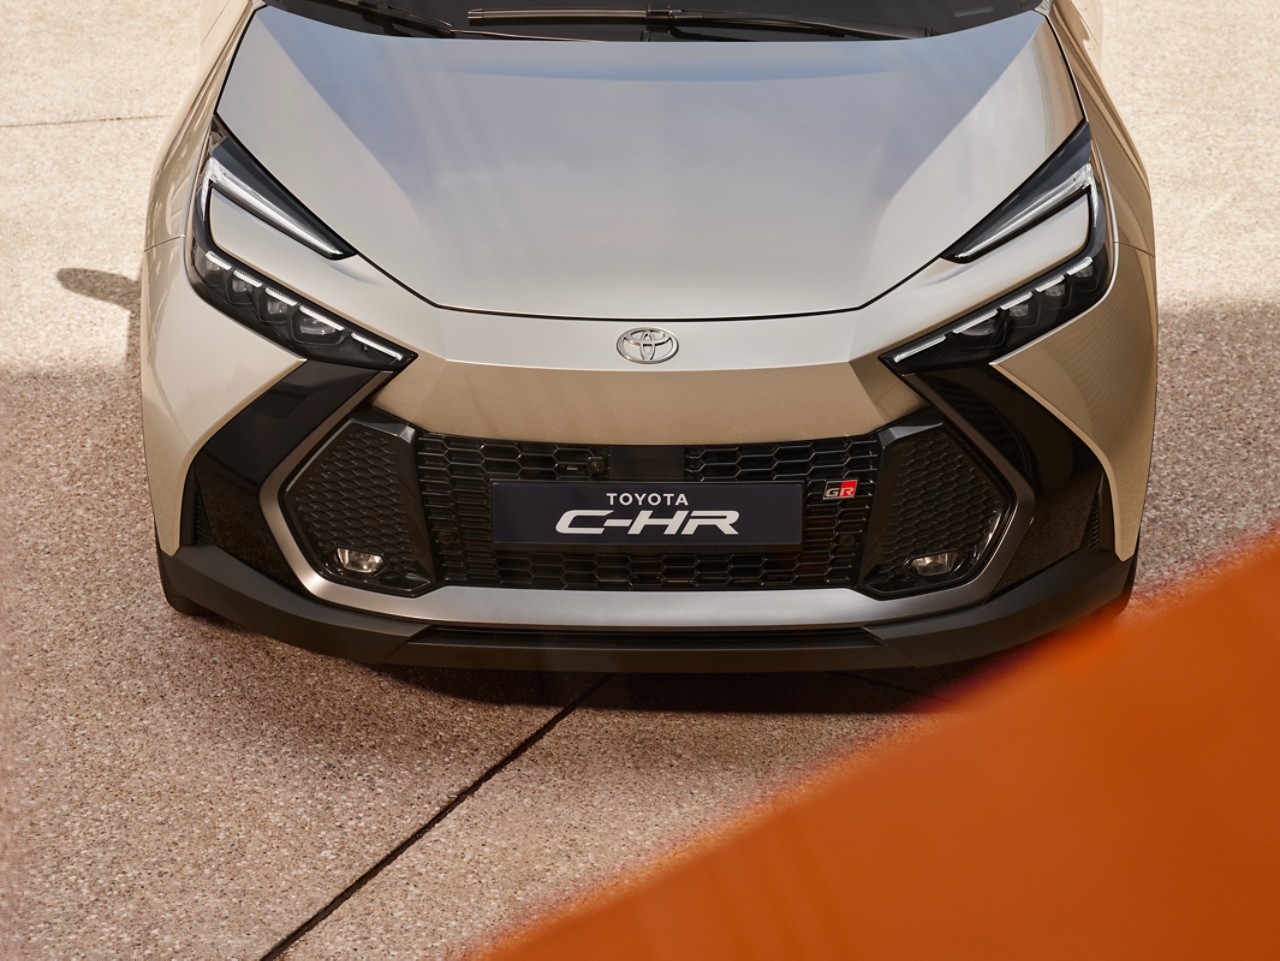 The front view of a New Toyota C-HR in silver with a black grille. It's parked on stone paving with a flash of orange in the foreground.